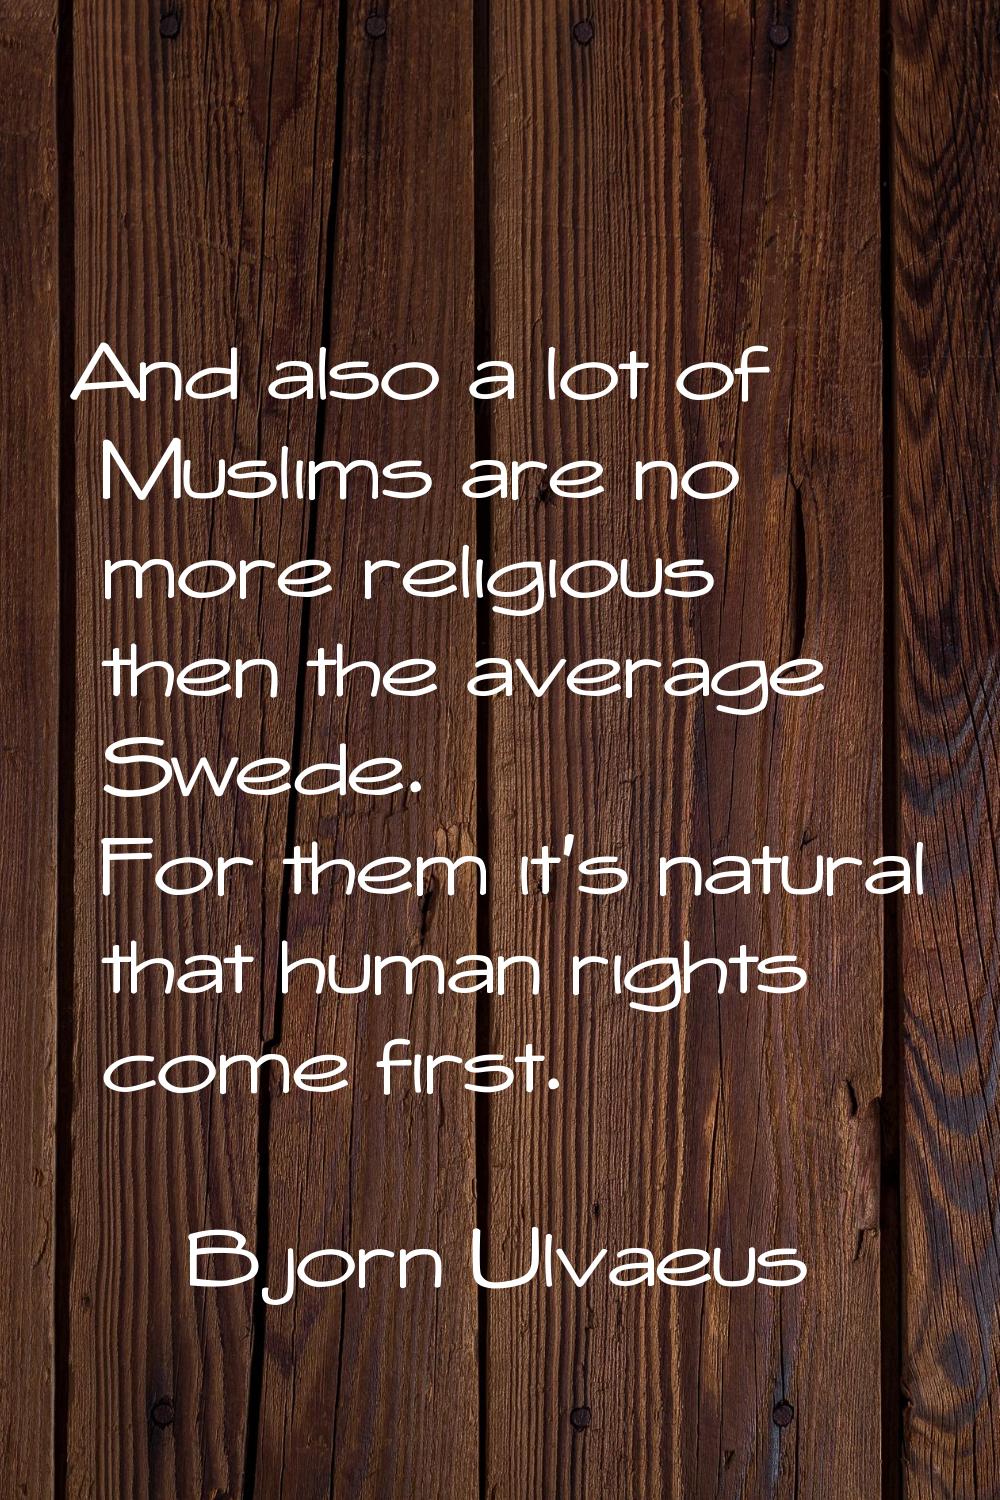 And also a lot of Muslims are no more religious then the average Swede. For them it's natural that 